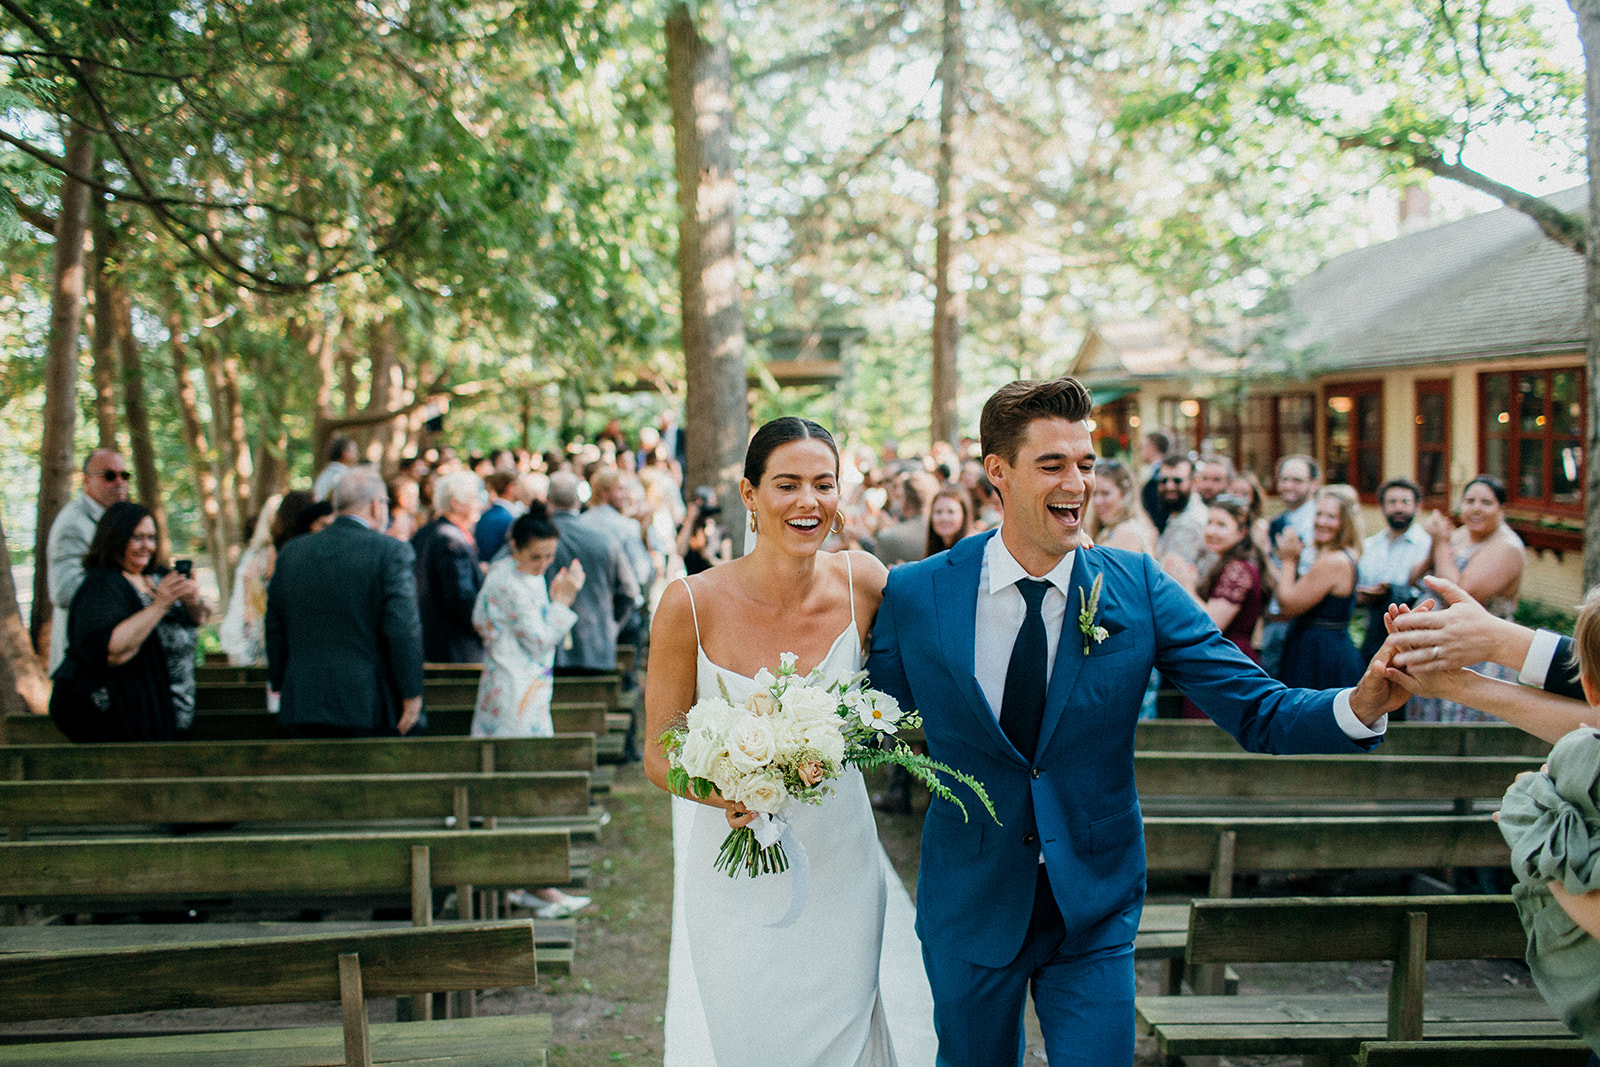 Wedding couple celebrates during their processional down the aisle at the chapel of Camp Wandawega